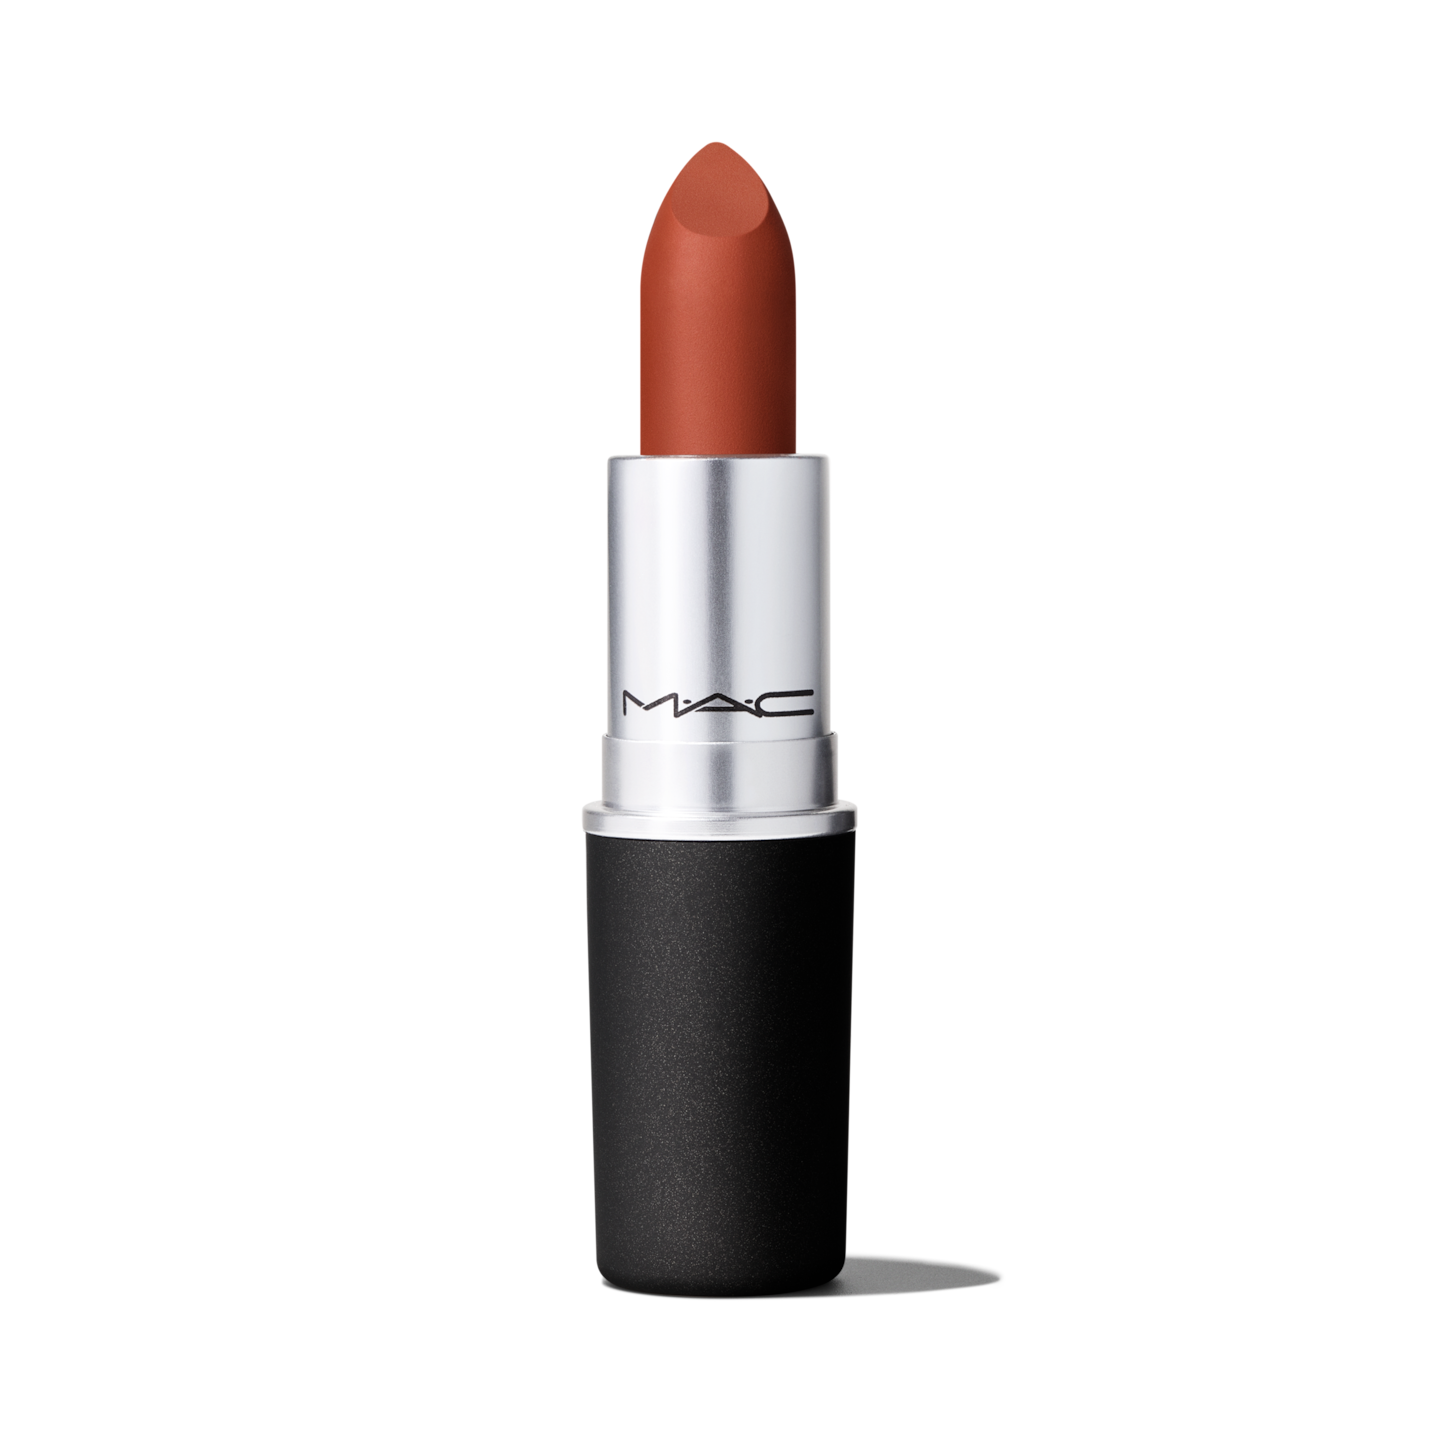 Buy MAC Lipstick VELVET TEDDY by MAC Online at Low Prices in India